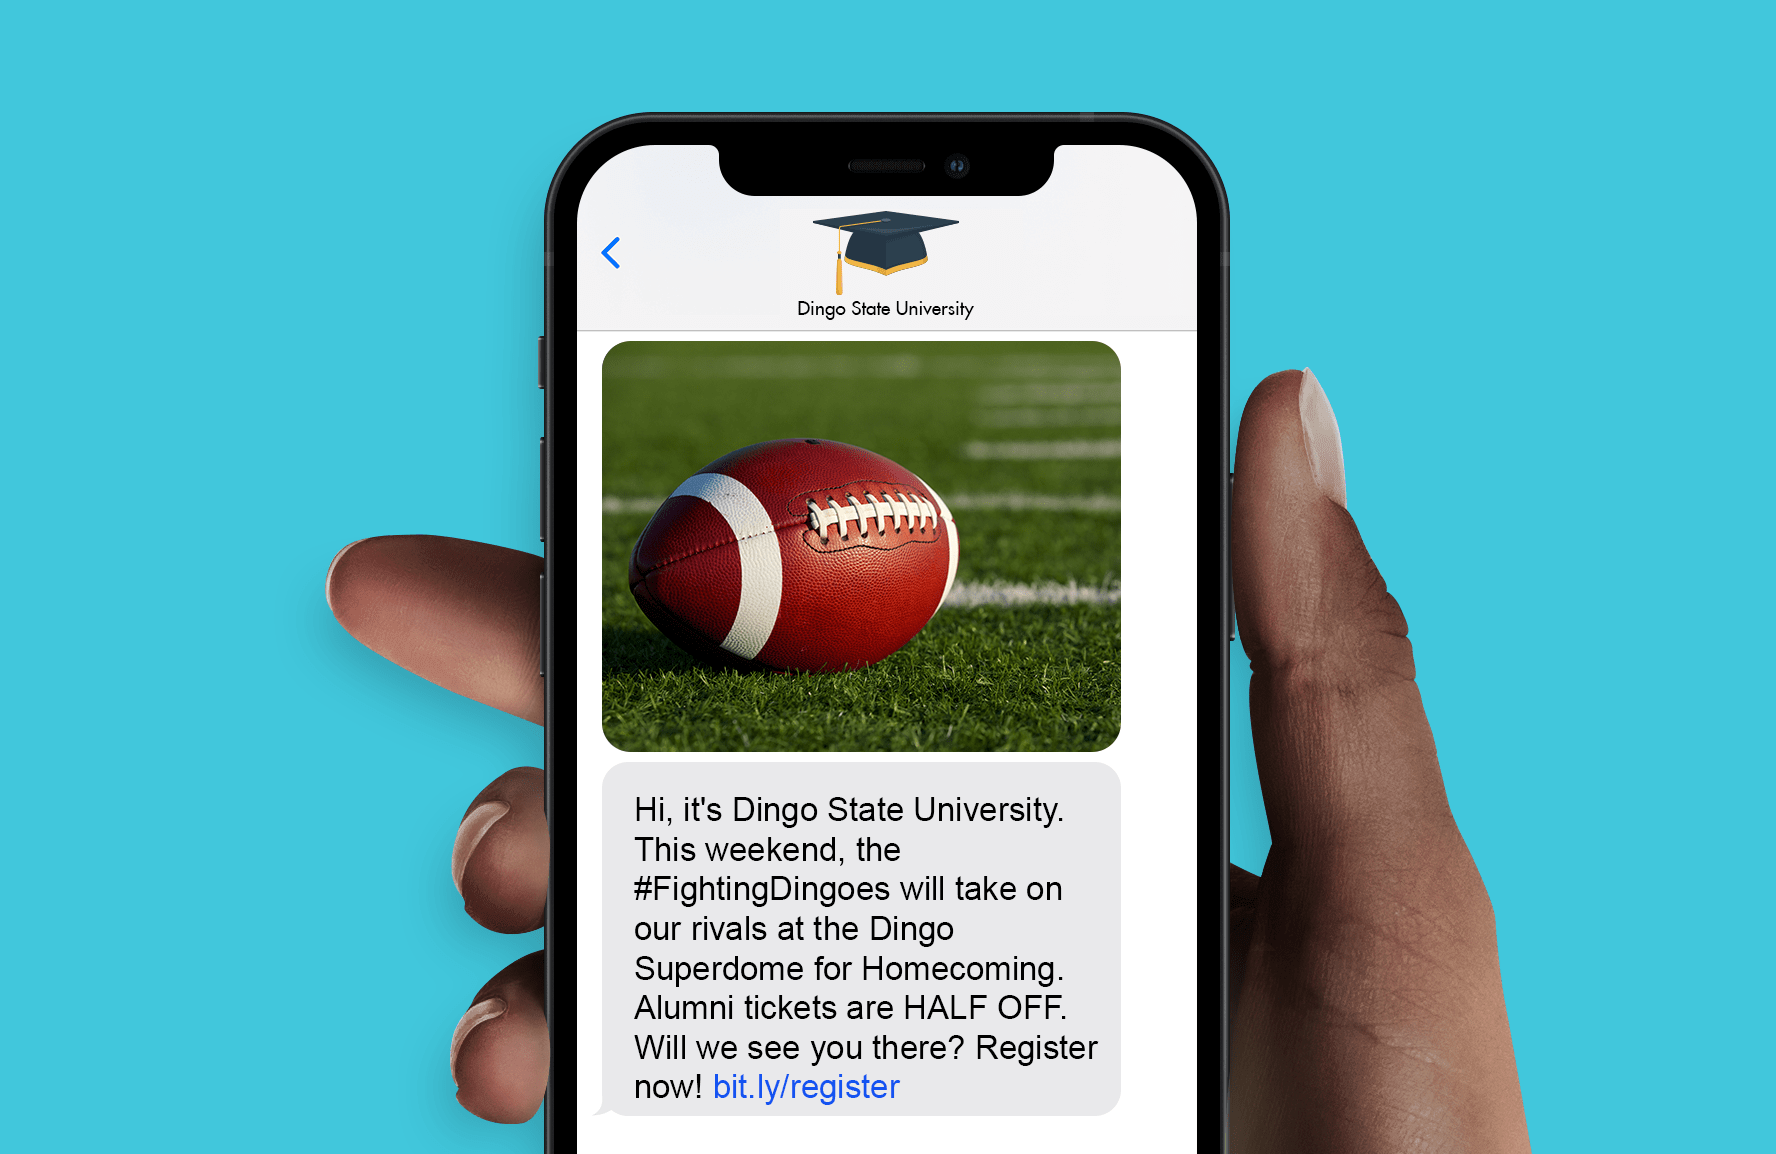 Your university can use higher education texting in various ways, including marketing upcoming sports games. 